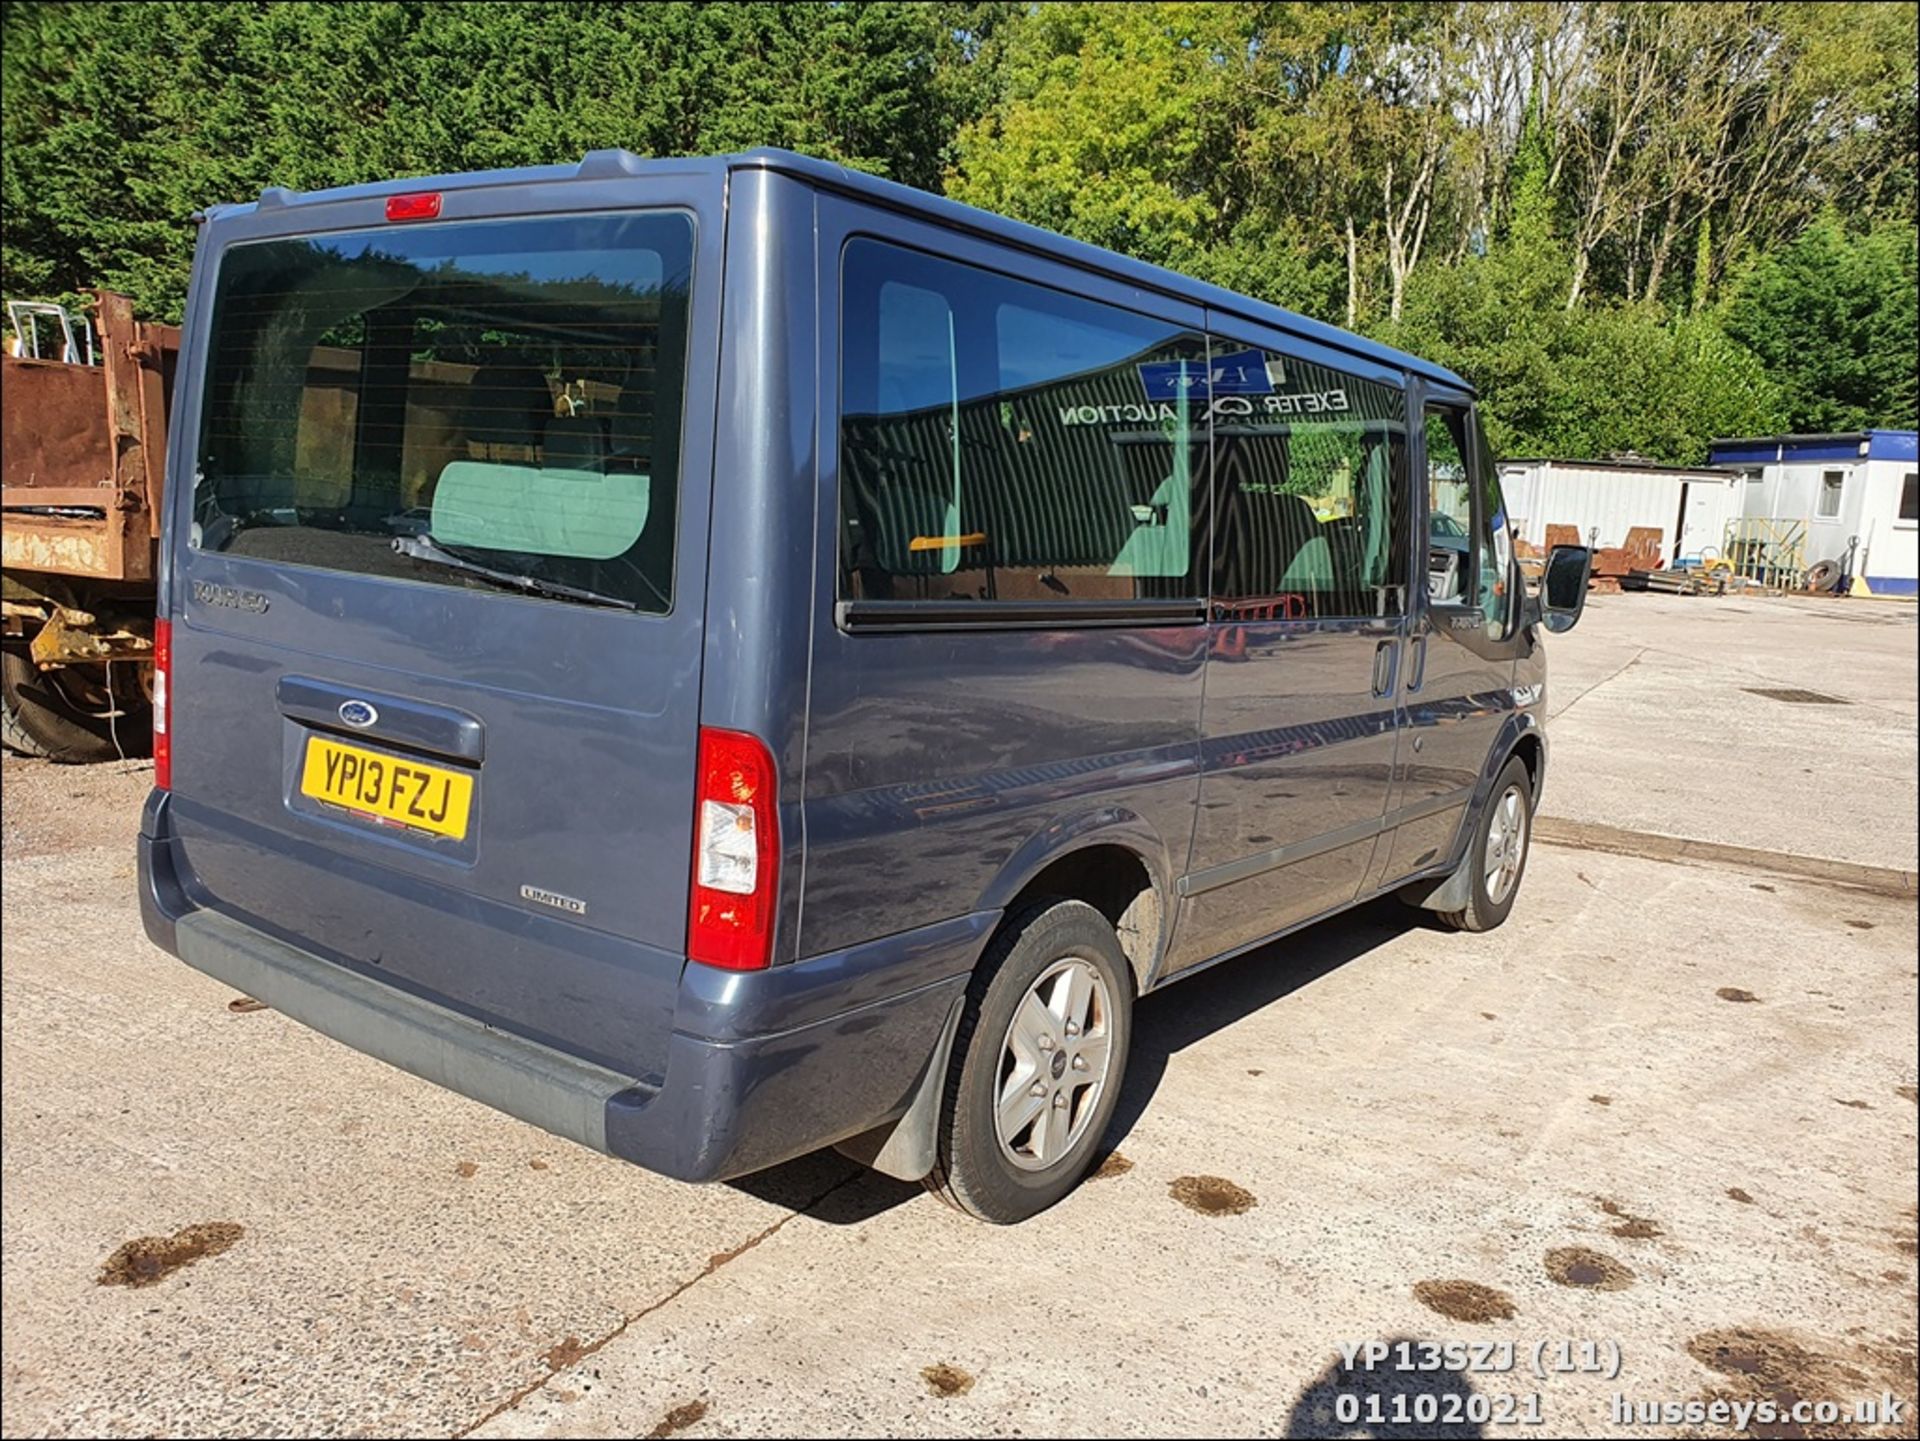 13/13 FORD TRANSIT 125 T280 FWD - 2198cc 5dr MPV (Grey) - Image 14 of 18